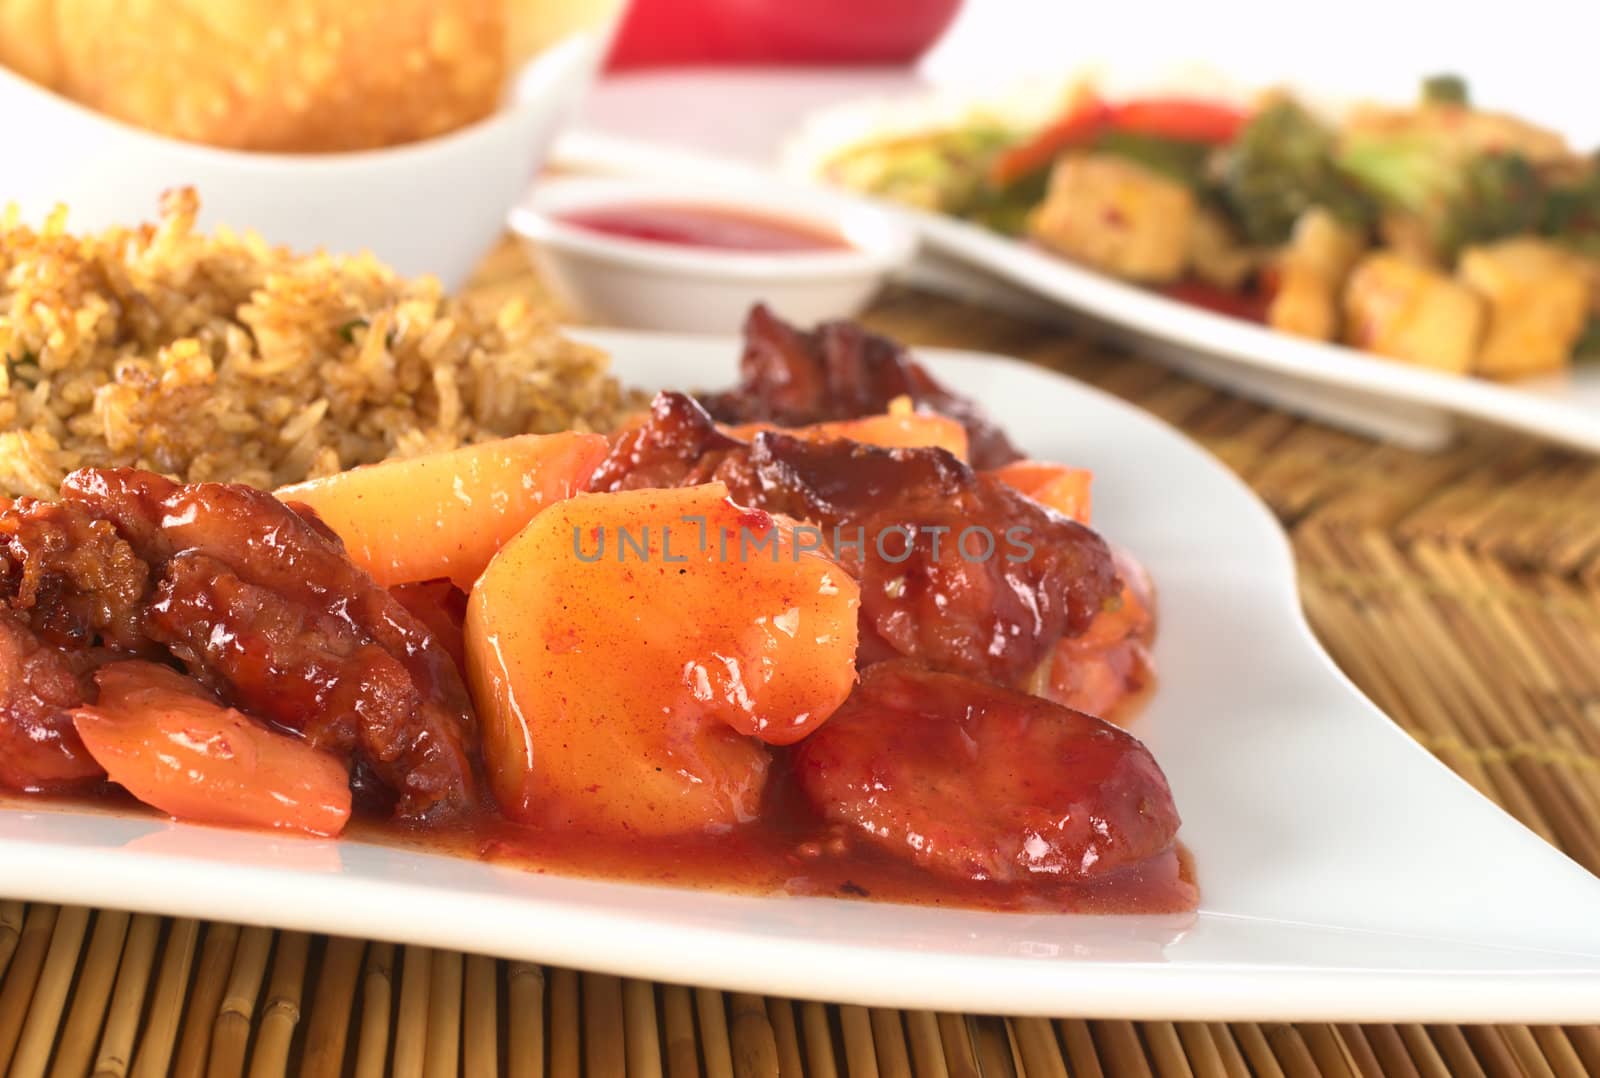 Chinese sweet and sour with pineapple and chicken pieces with rice in the back (Selective Focus, Focus on the pineapple and chicken in the front)